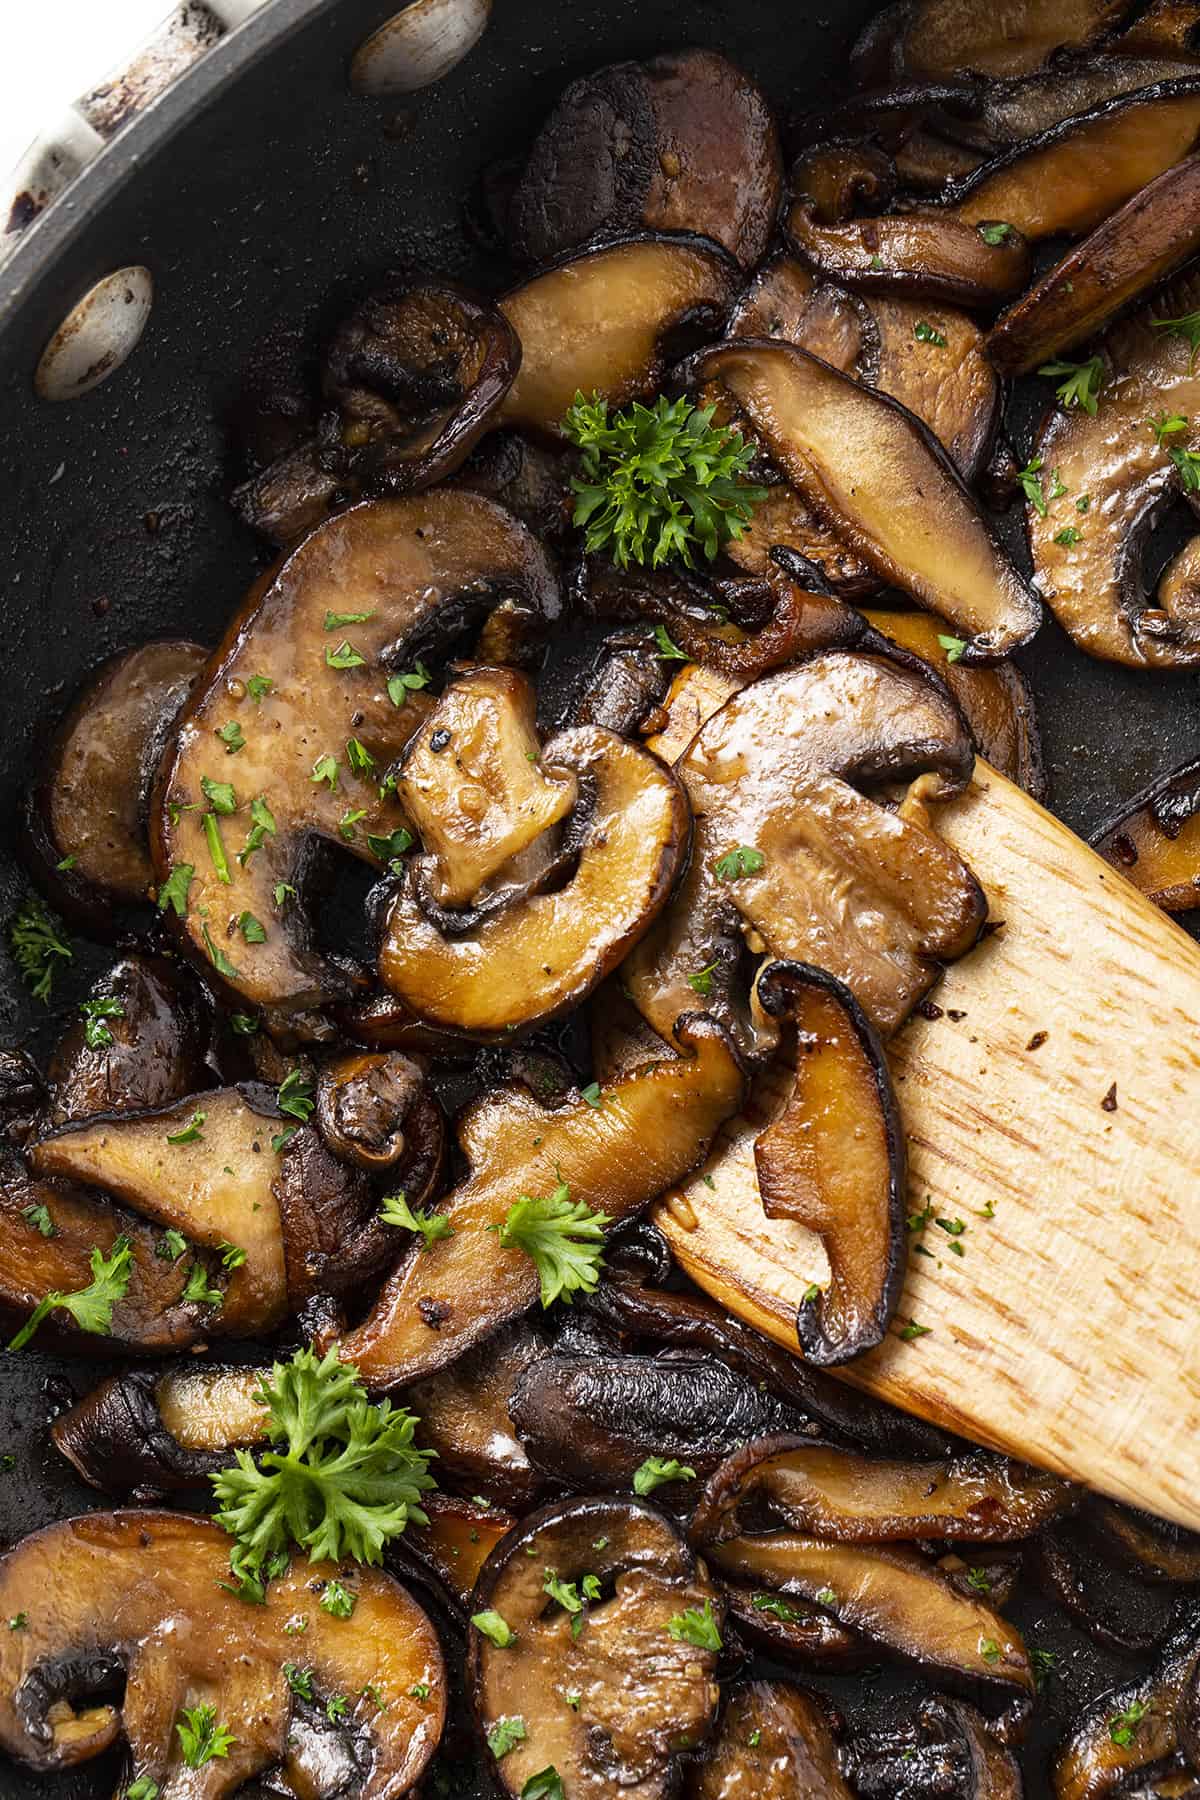 Sauteed mushrooms with butter and wooden spatula.